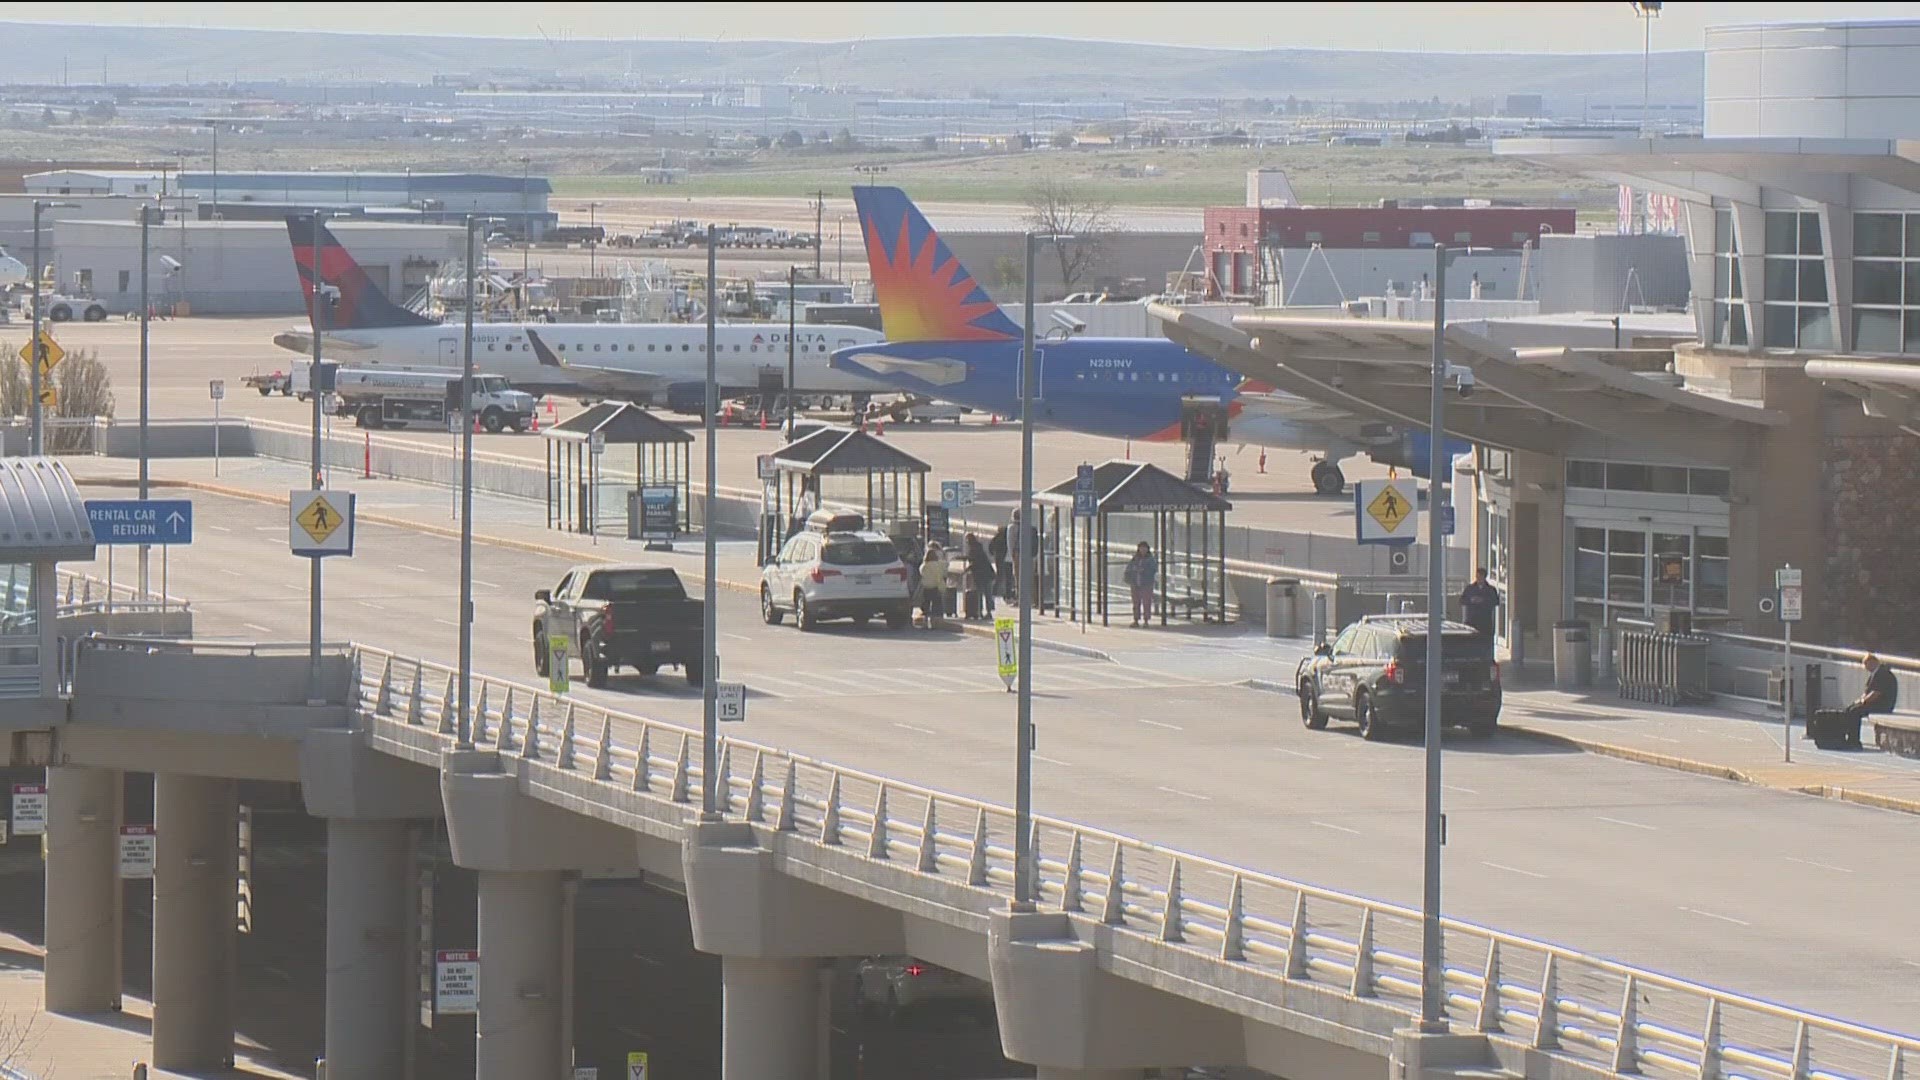 As the area's population grows, so does the demand for flights at Boise Airport.